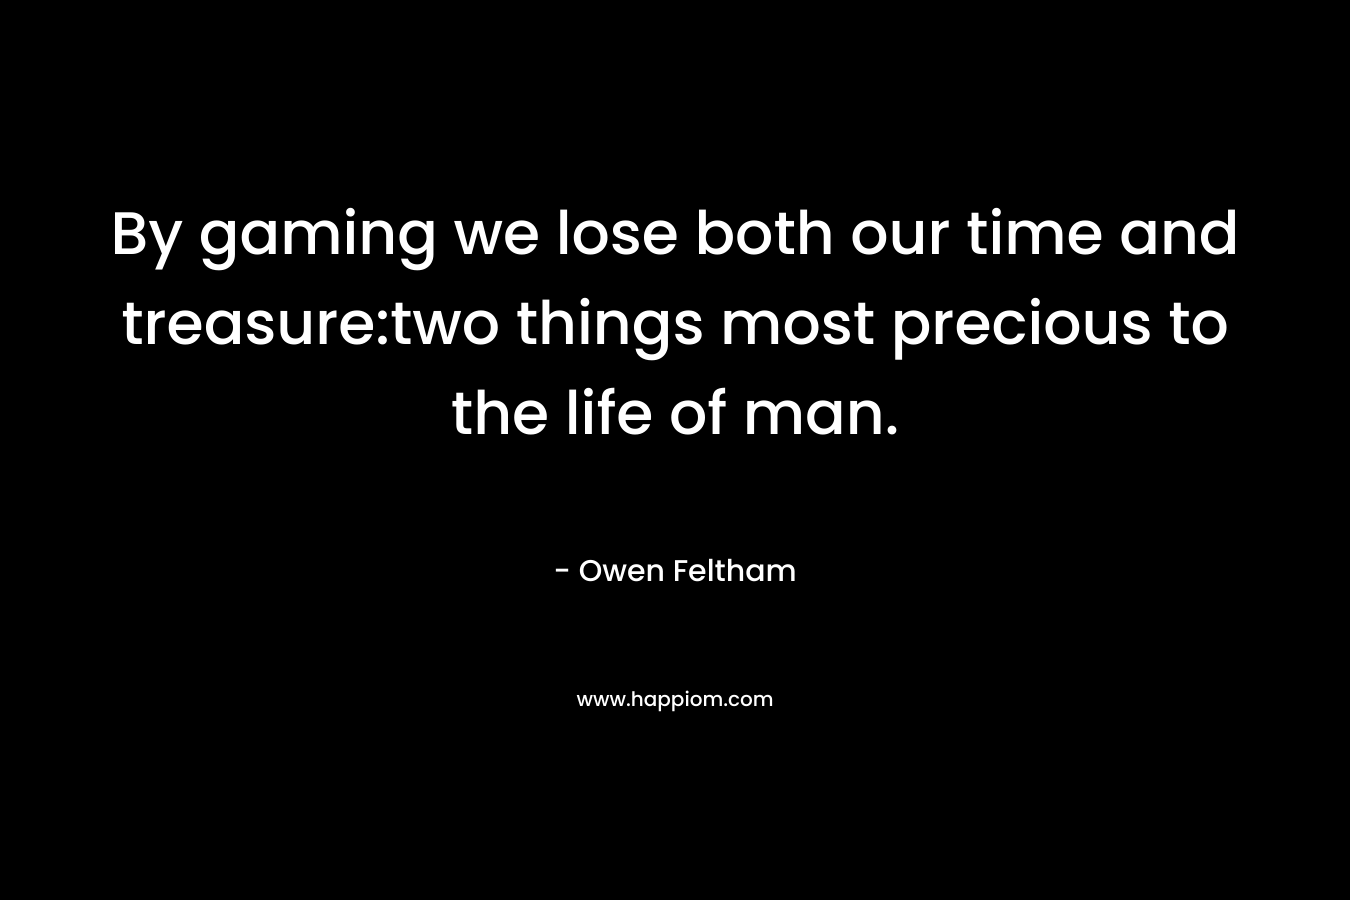 By gaming we lose both our time and treasure:two things most precious to the life of man.